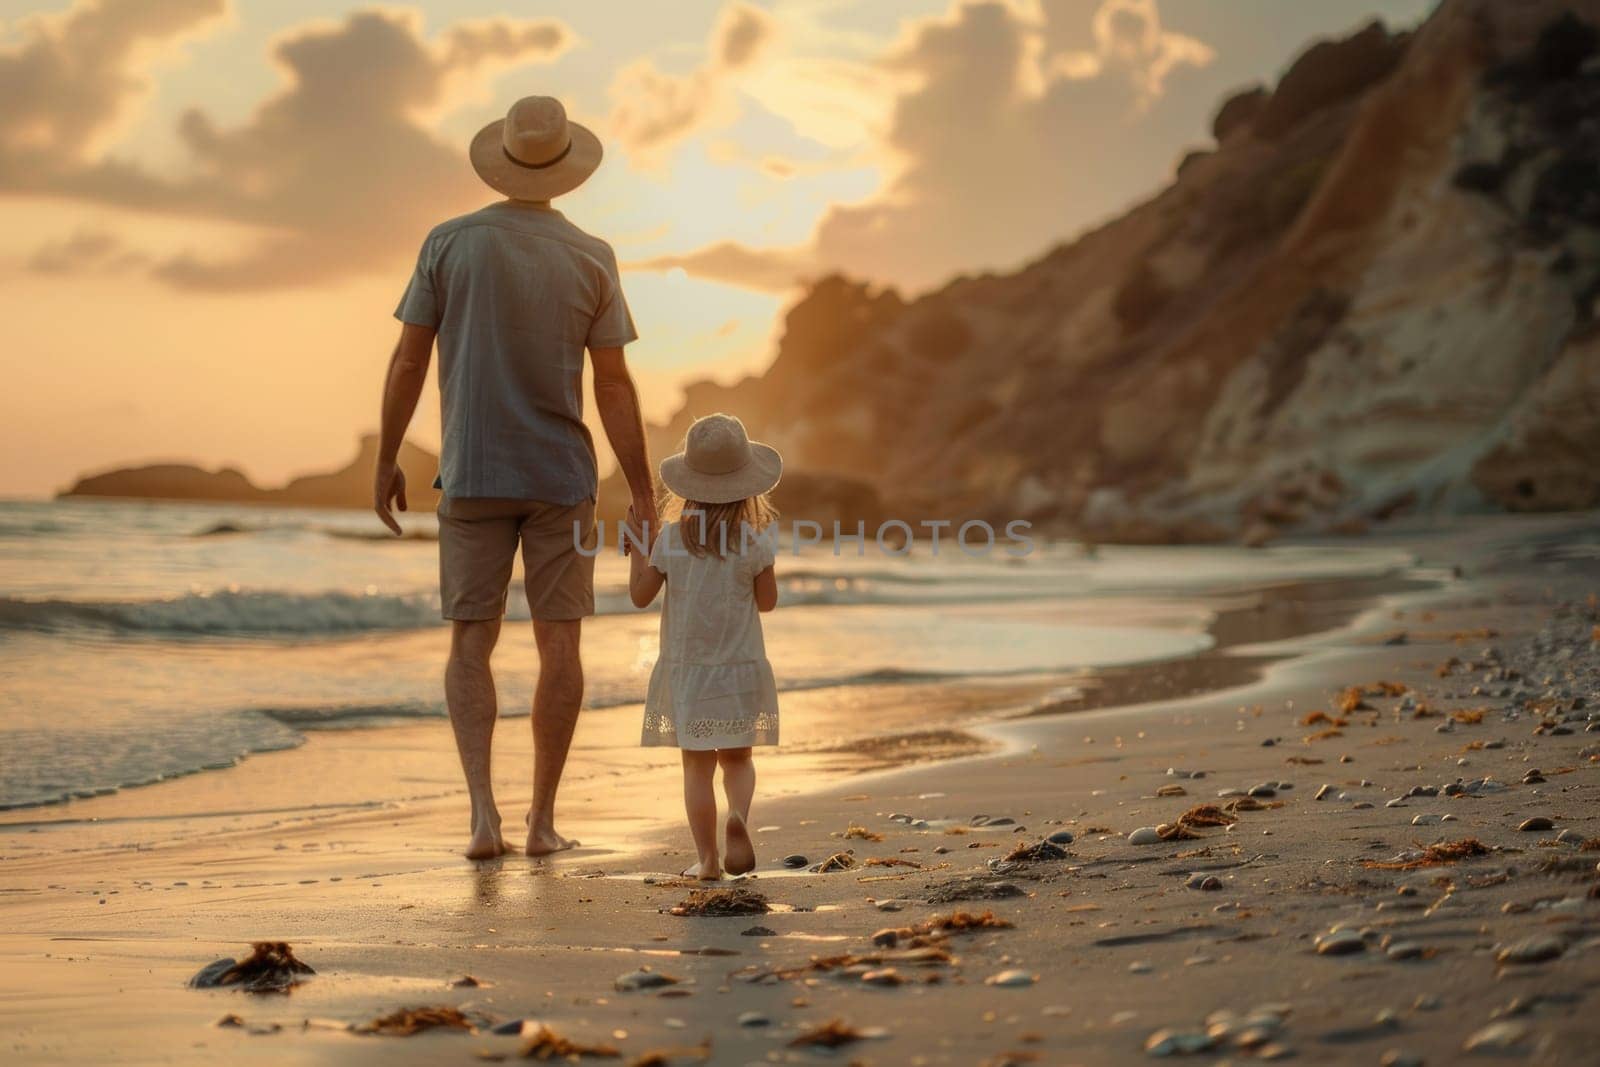 A man and a little girl are walking on the beach. The man is holding the girl's hand. The sky is orange and the sun is setting. Scene is peaceful and relaxing